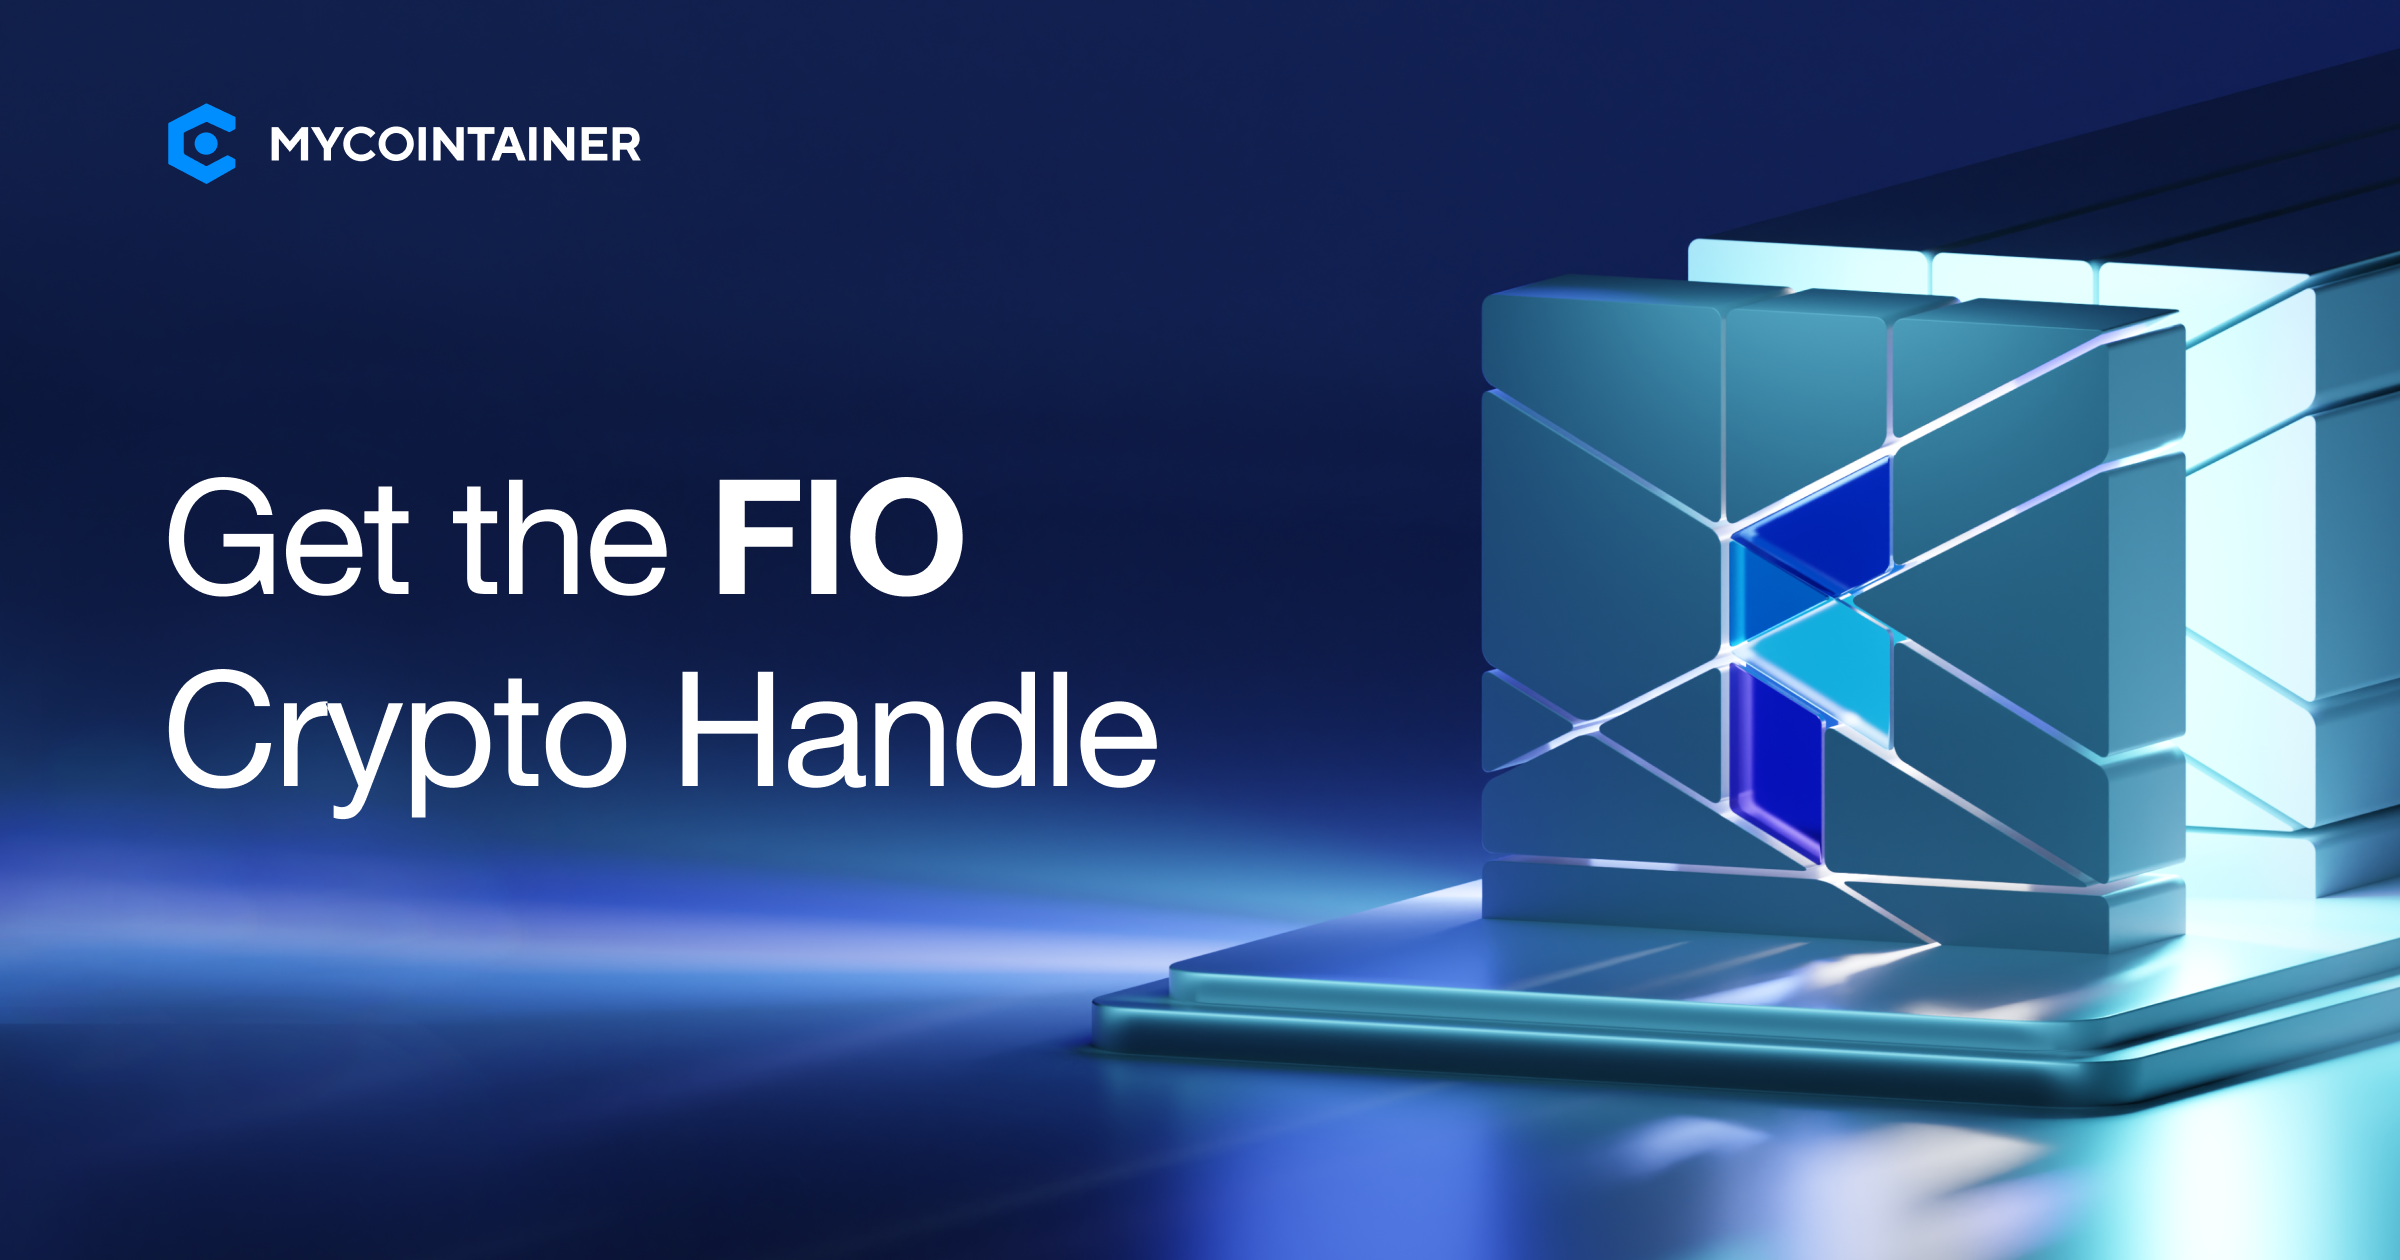 Limited Number of Free FIO Crypto Handles for MyCointainer Users